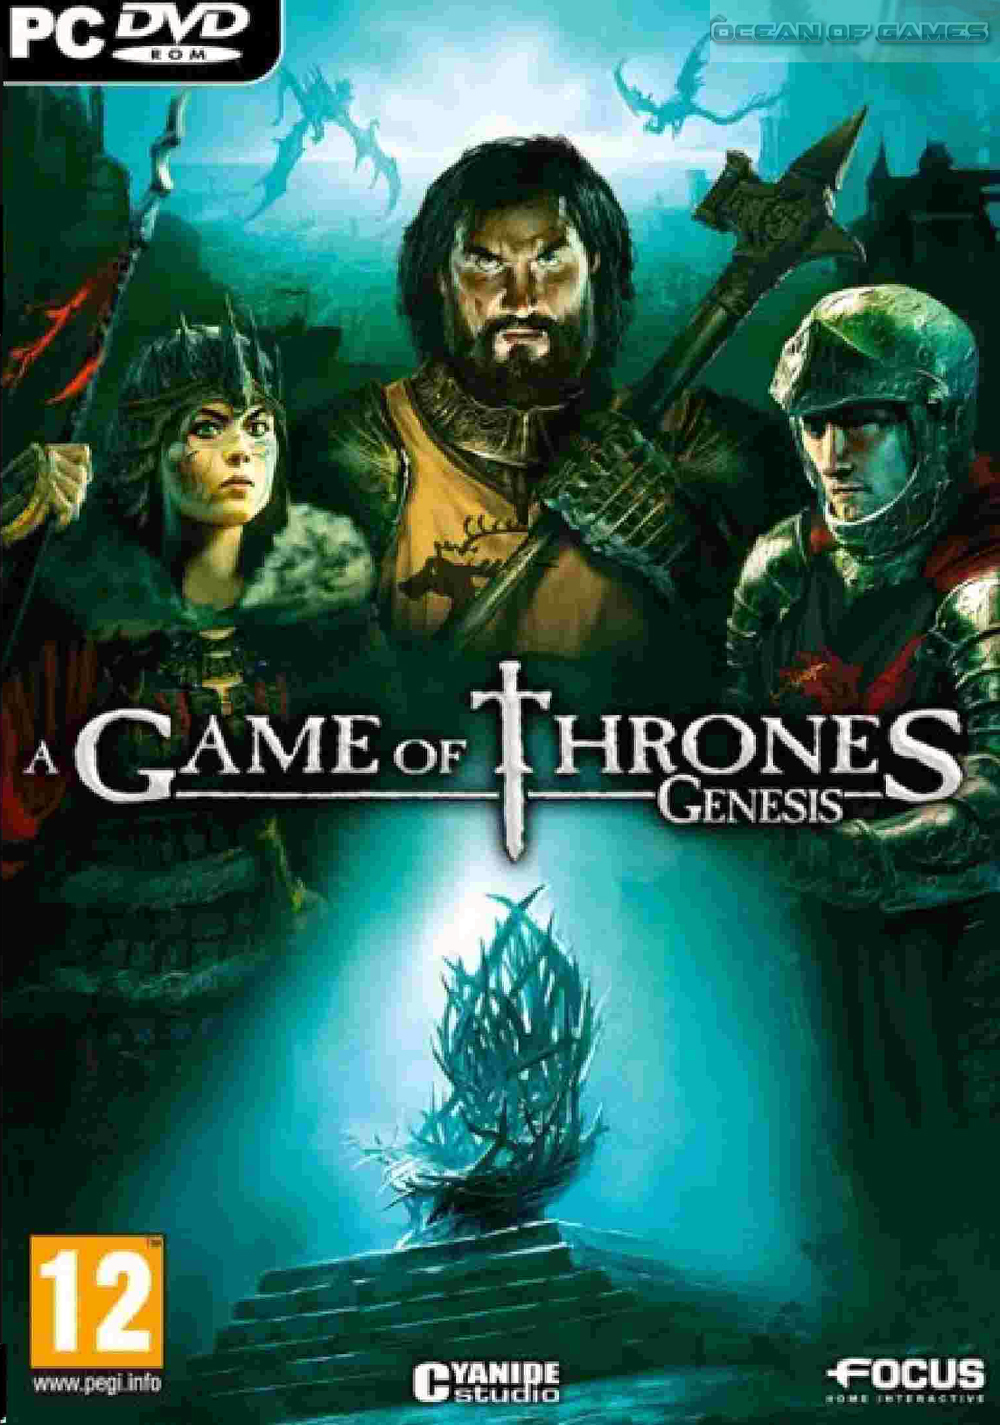 A Game of Thrones Genesis Free Download